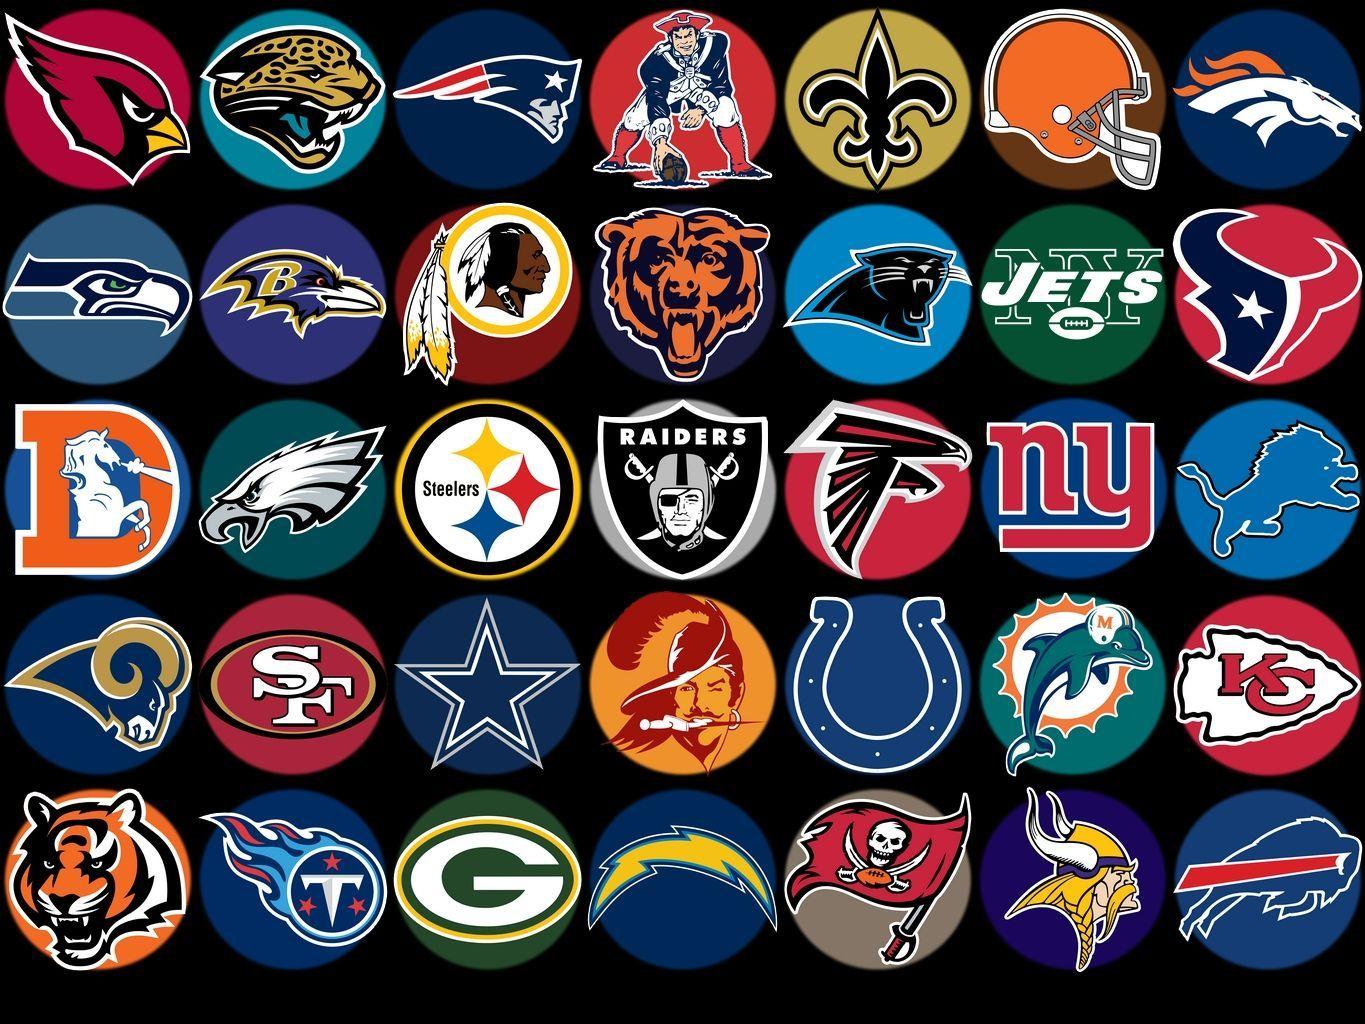 NFL American Football Logo - pubs to watch the NFL in Dublin